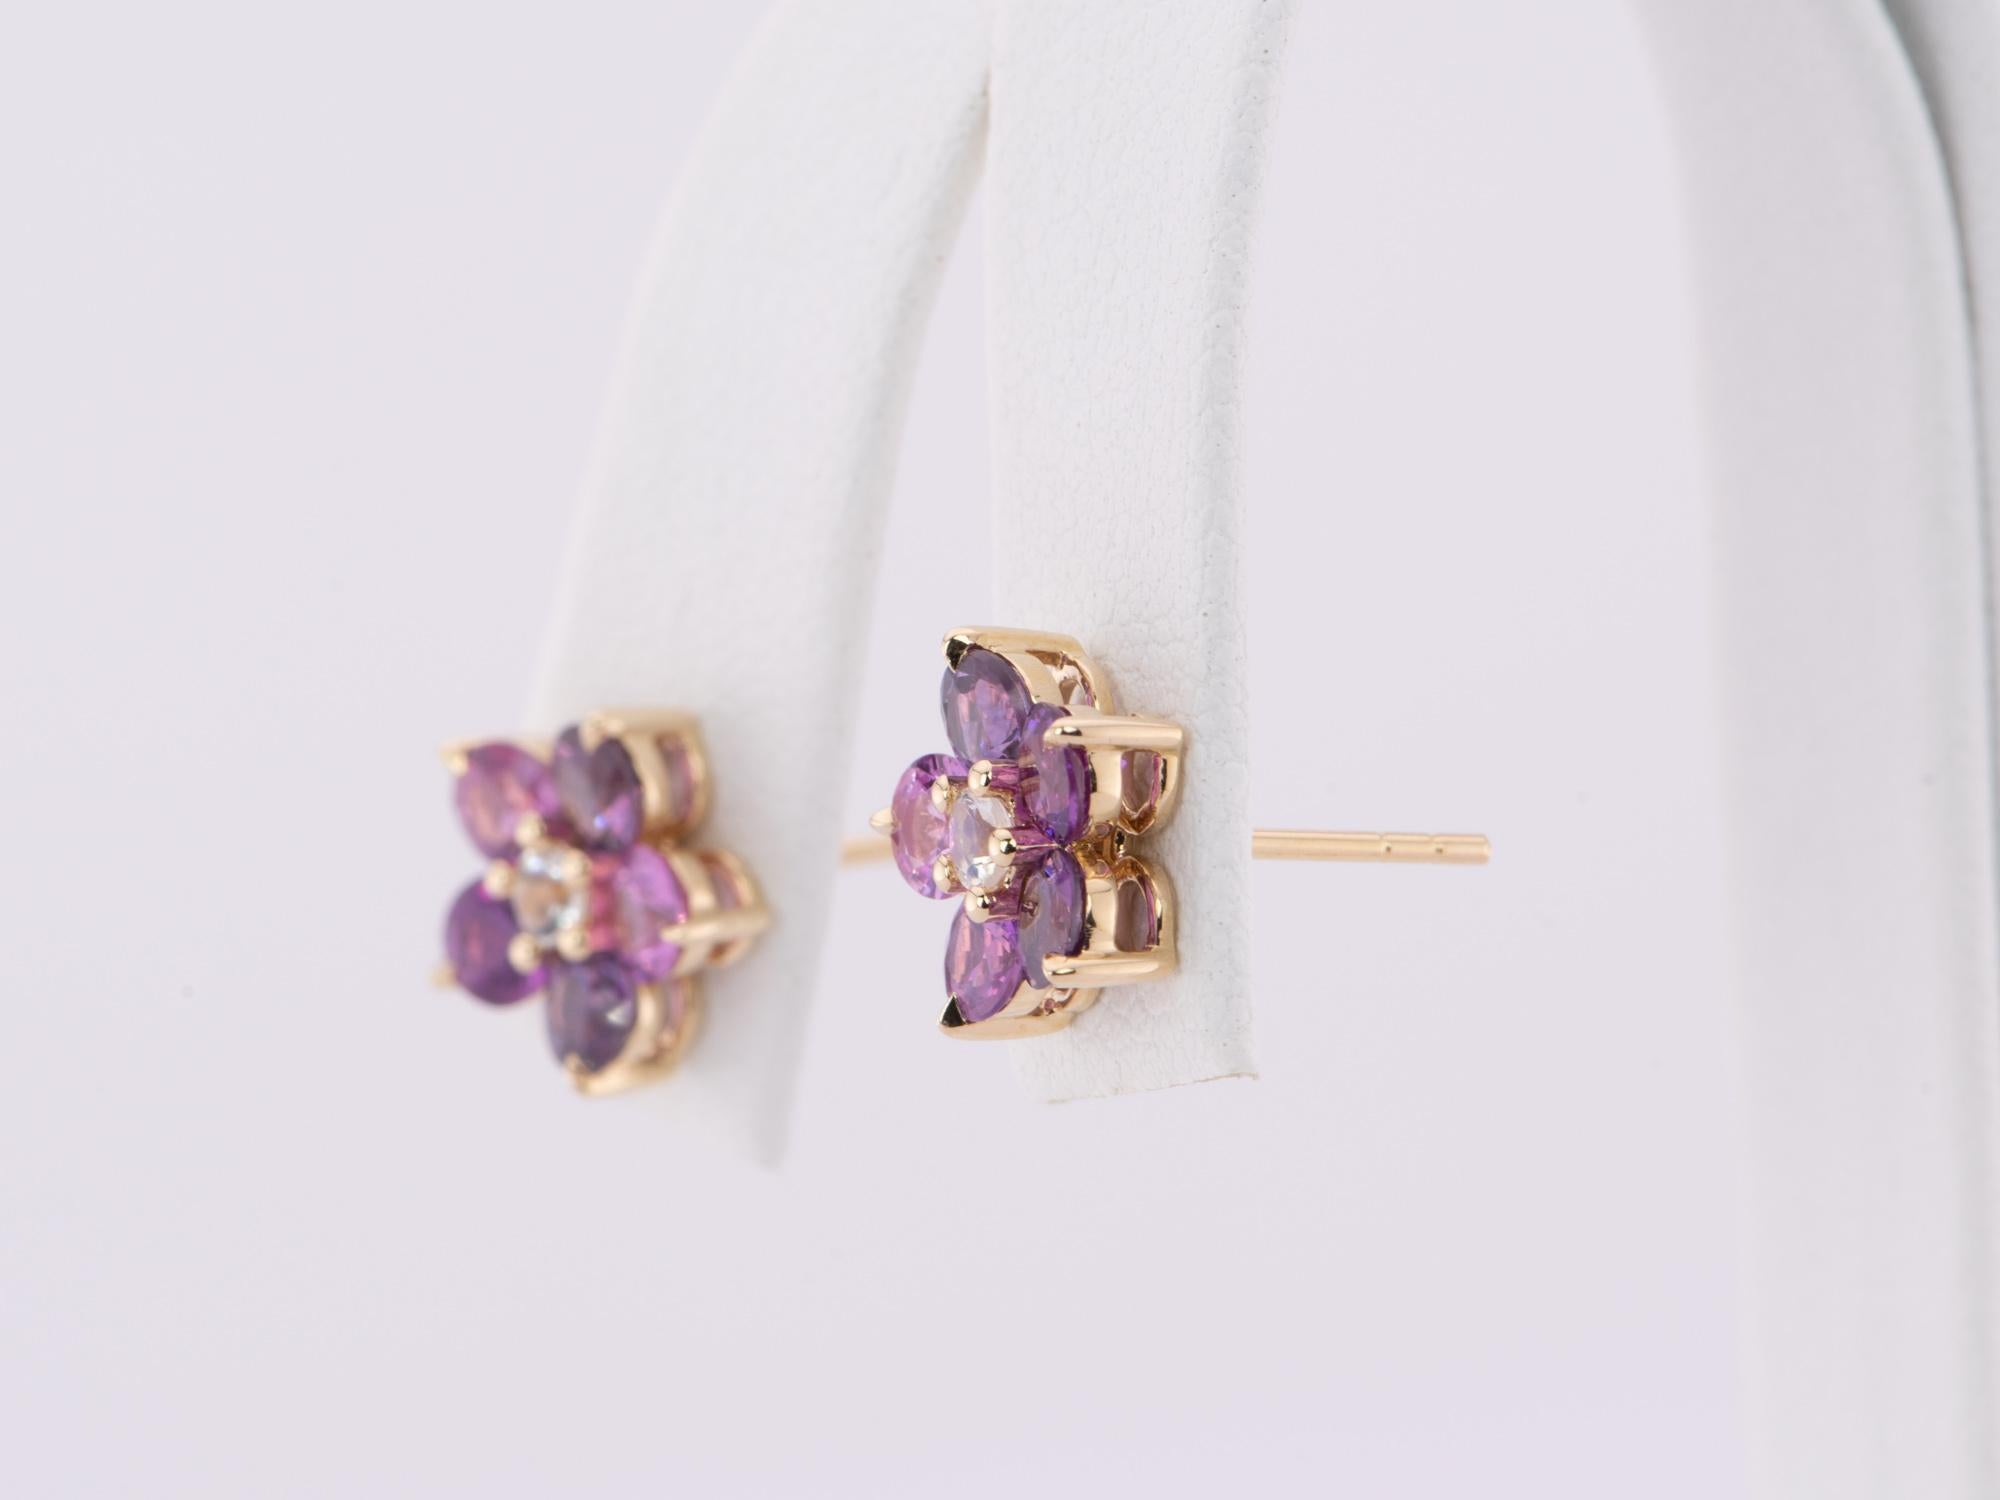 ♥ Bright Purple Sapphire and Moonstone Flower Earrings 14K Gold
♥ The item measures 9.7mm in length, 9.7mm in width, and 4mm in height.
♥ Material: 14K Yellow Gold
♥ Gemstone: Sapphire, 2.1ct. Moonstone, 0.18ct
♥ All stone(s) used are genuine,